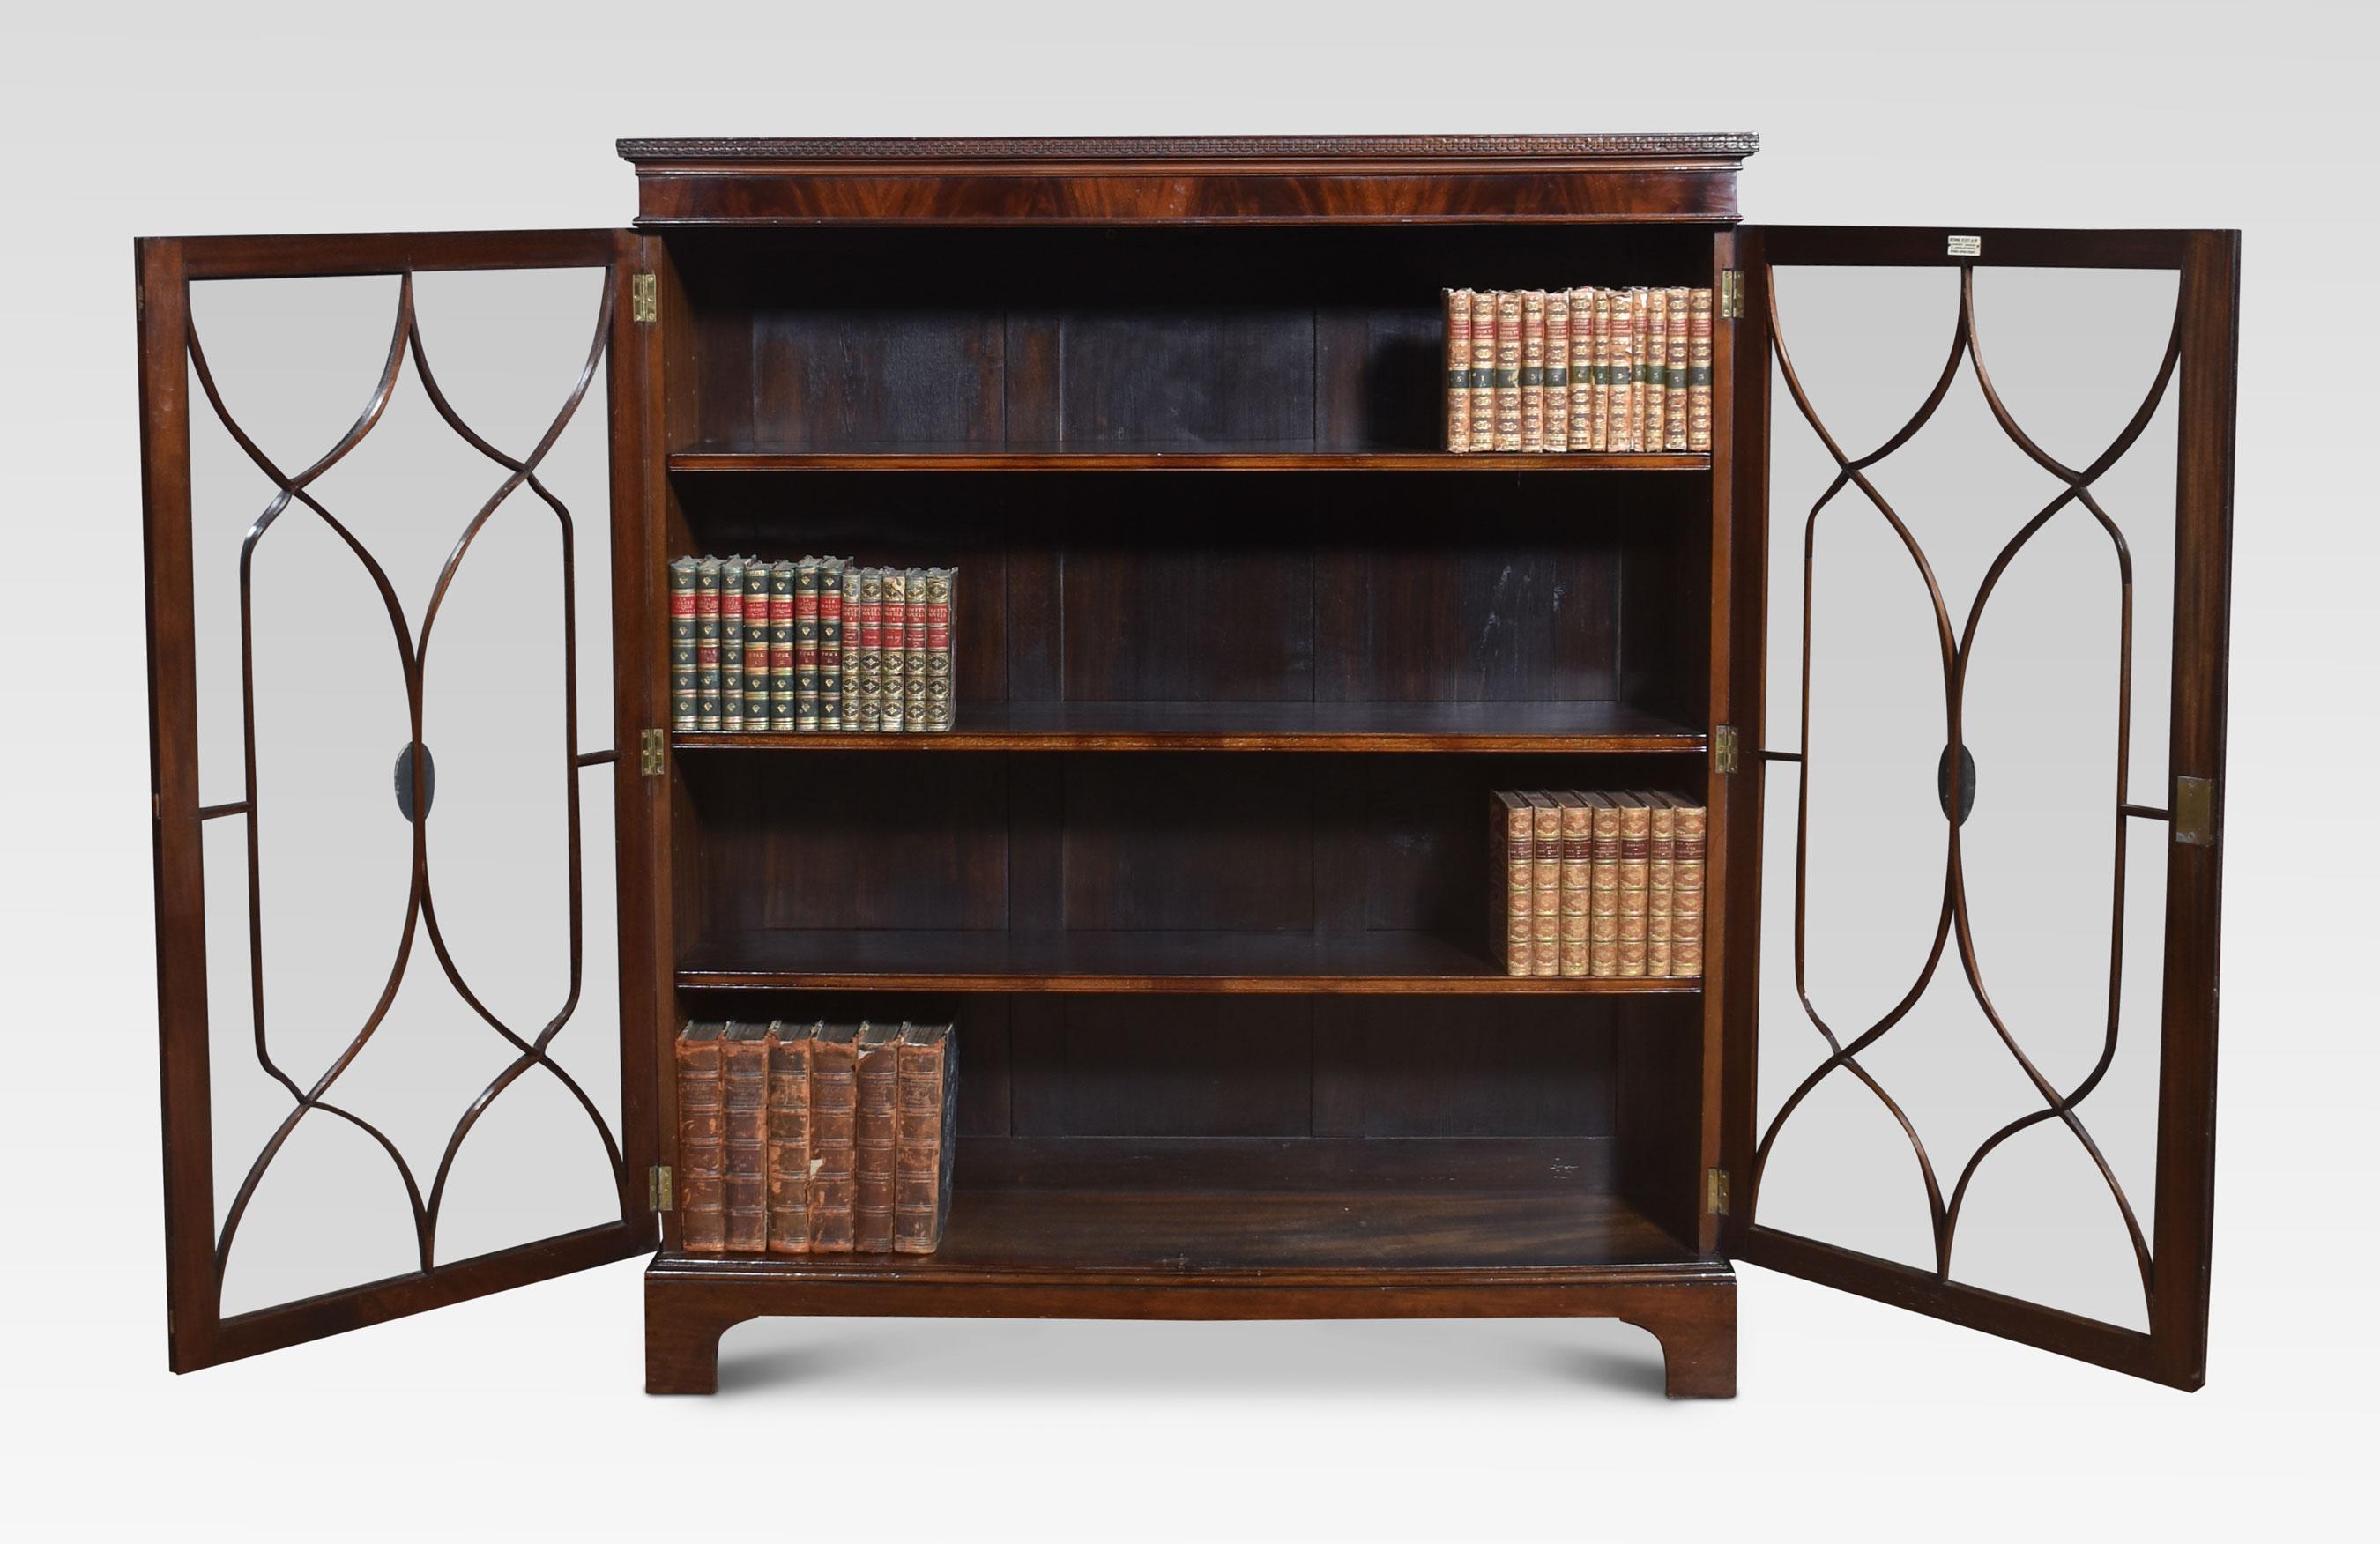 Mahogany two-door glazed bookcase, the rectangular well-figured top having carved moulded edge. Above two large astragal glazed doors opening to reveal three adjustable shelves. All raised on bracket feet

Dimensions
Height 55 Inches
Width 48